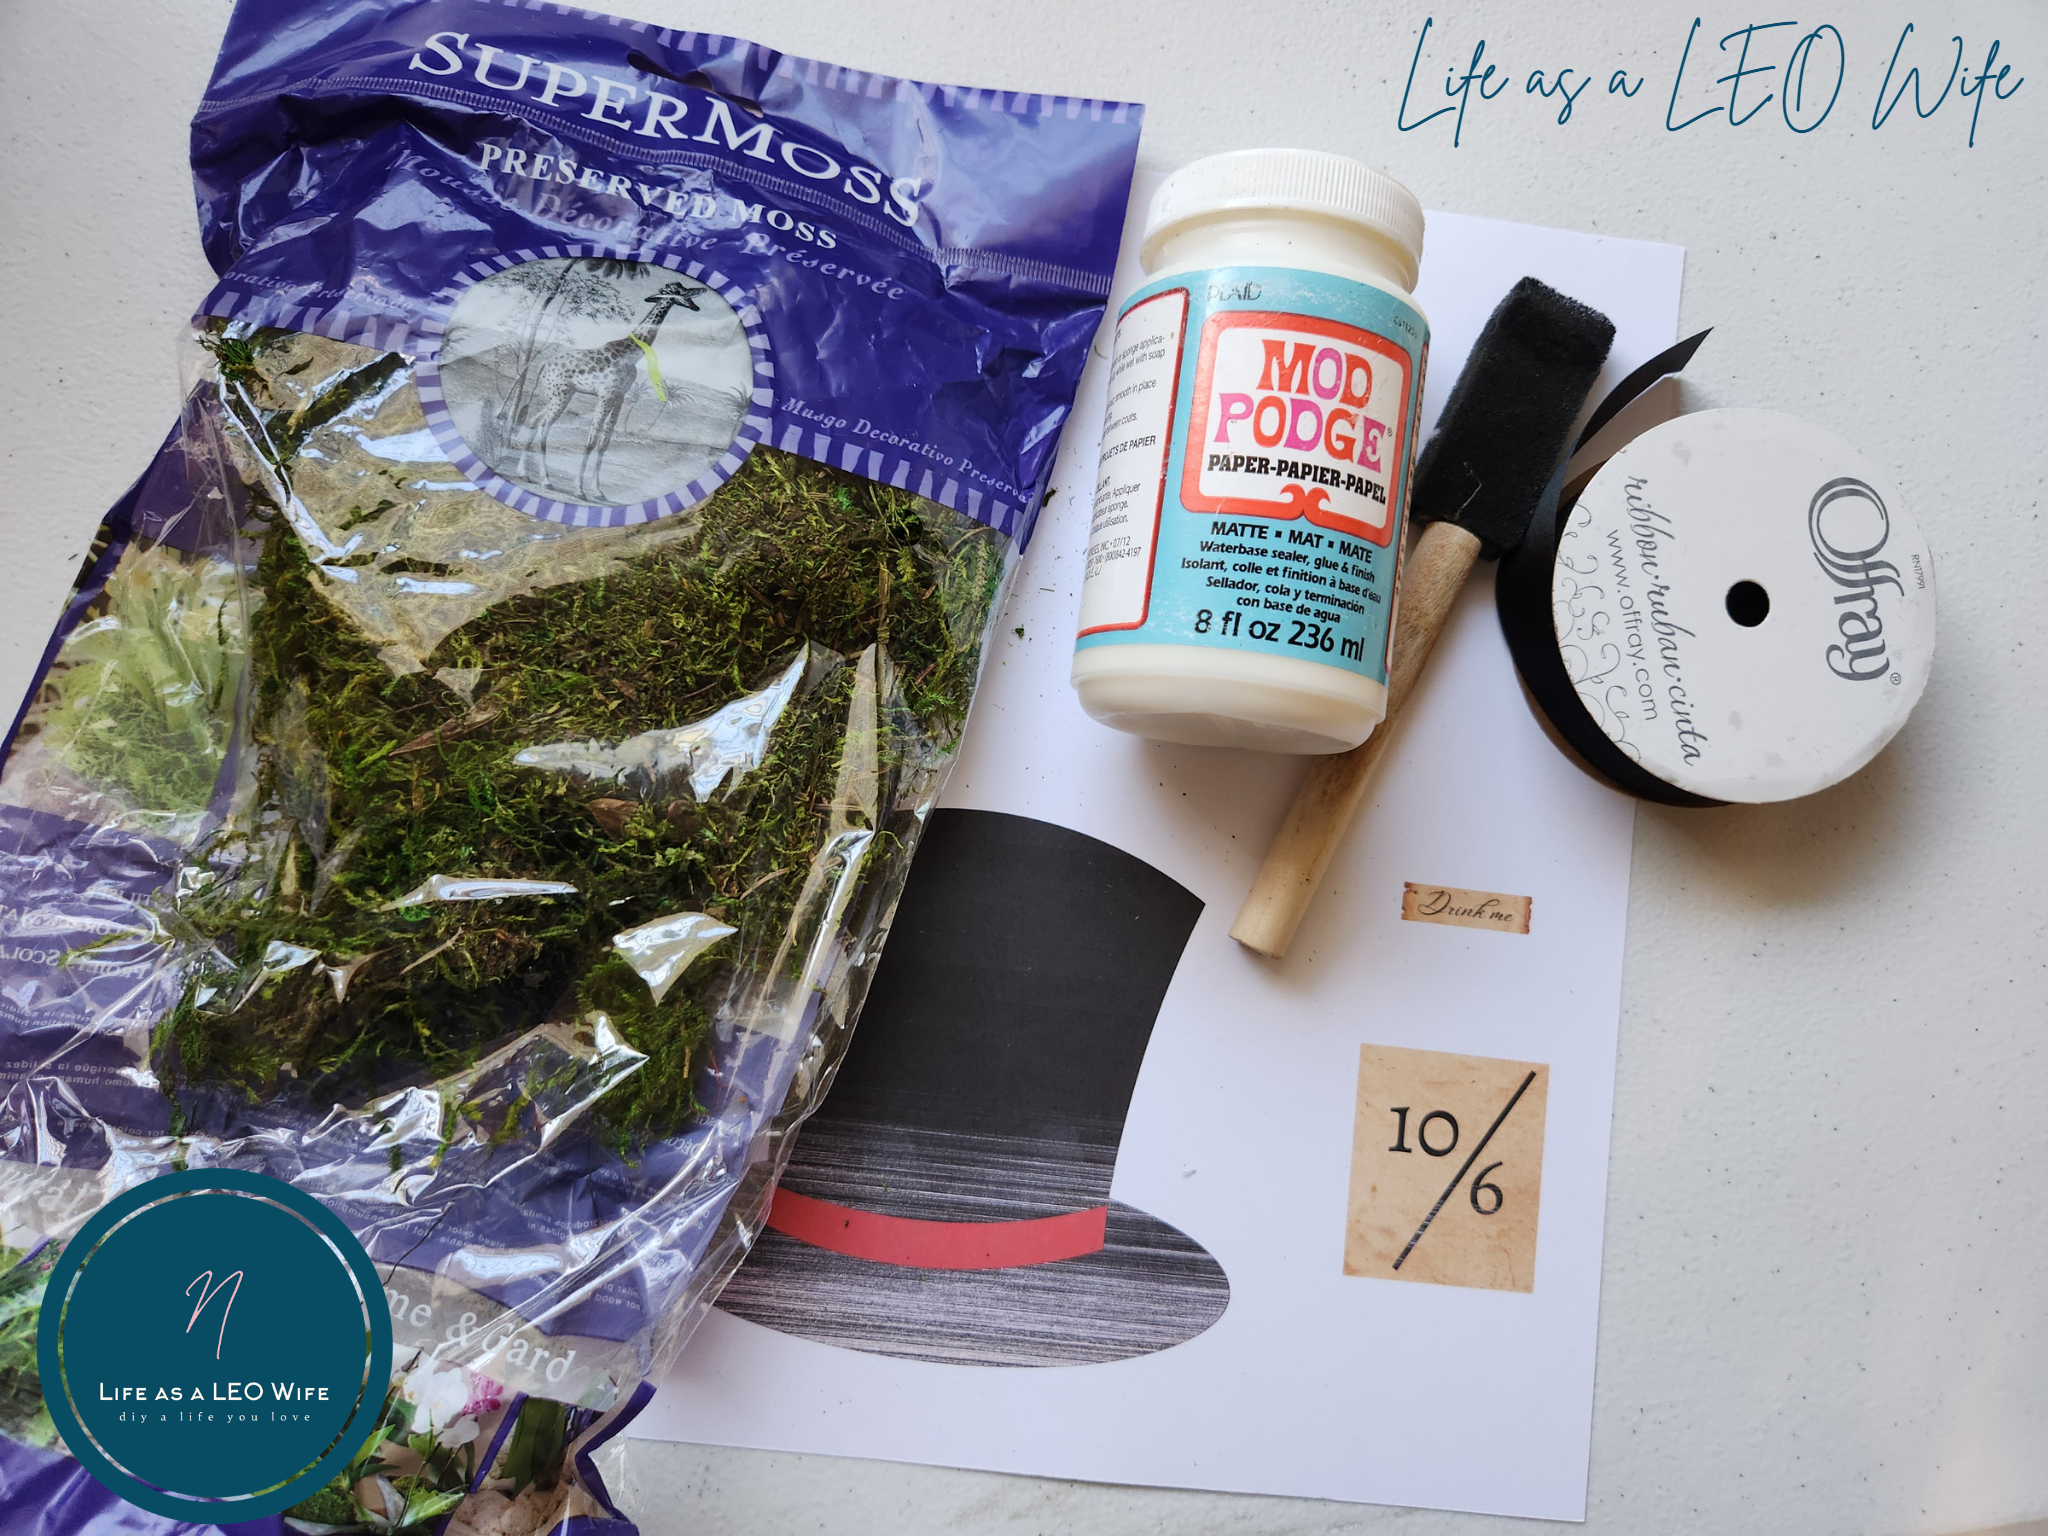 Supplies for a DIY Mad Hatter hat to place on the Alice in Wonderland tea tray: top hat printed on cardstock, 1/2" black ribbon, foam brush, Mod Podge, and preserved moss.